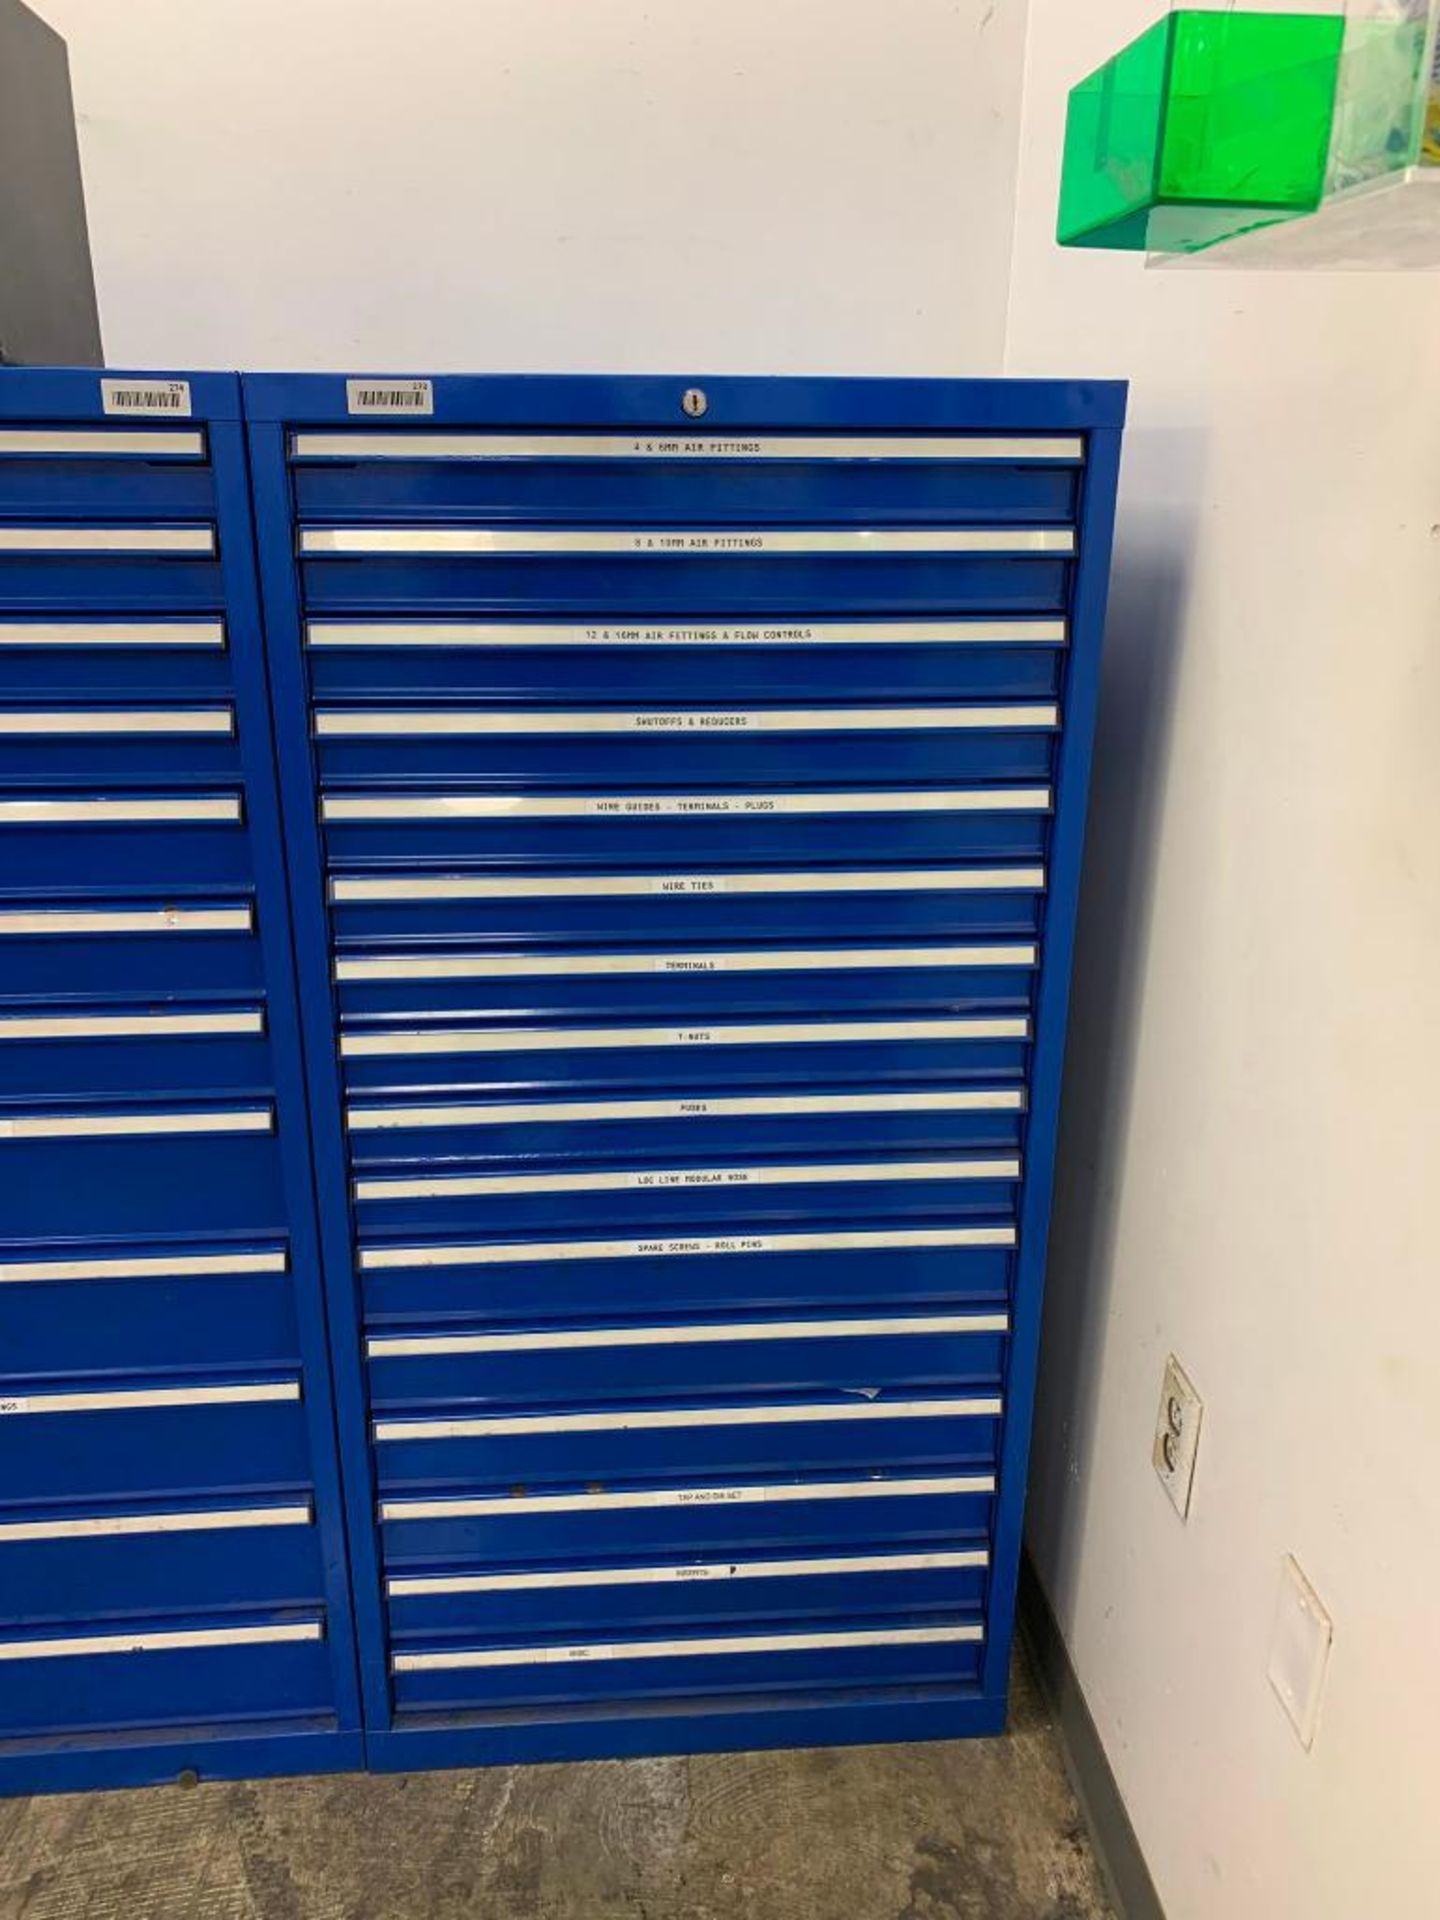 Fastenal 16-Drawer Cabinet w/ Content: Air Fittings, Reducers, Terminals, T-Nuts, Fuses, Loc Line, S